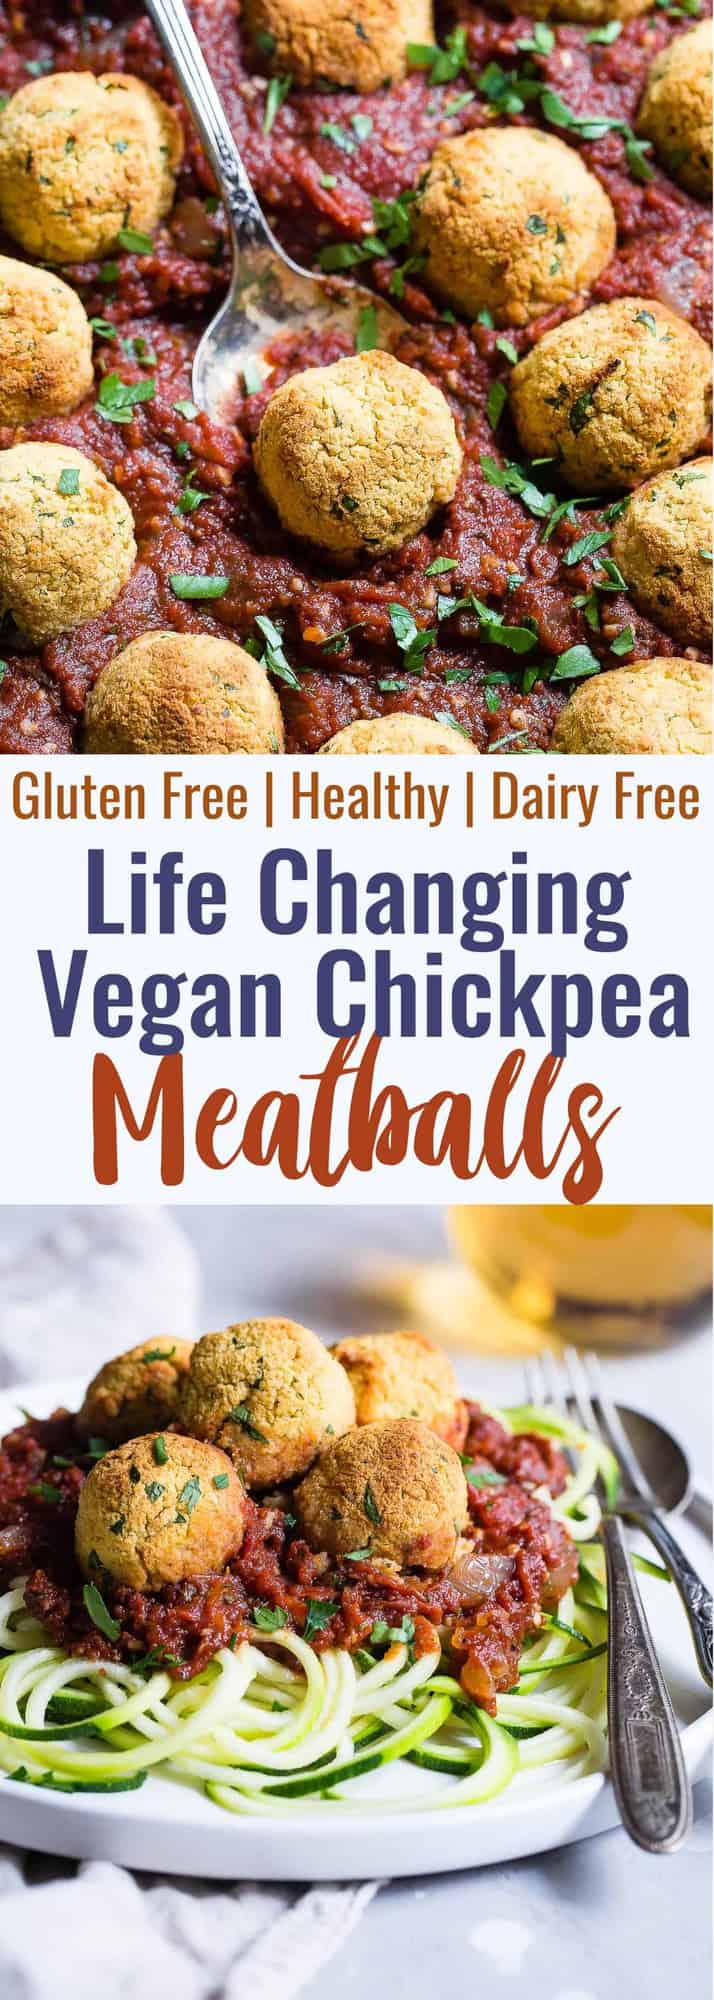 Gluten Free Vegan Chickpea Meatballs with Tomato Sauce - These meatless, gluten free meatballs are SO crispy, they will blow your mind! Serve them with an easy tomato sauce for a tasty, healthy dinner that's packed with plant protein and fiber! | #Foodfaithfitness | #Vegan #Glutenfree #Healthy #Vegetarian #Dairyfree